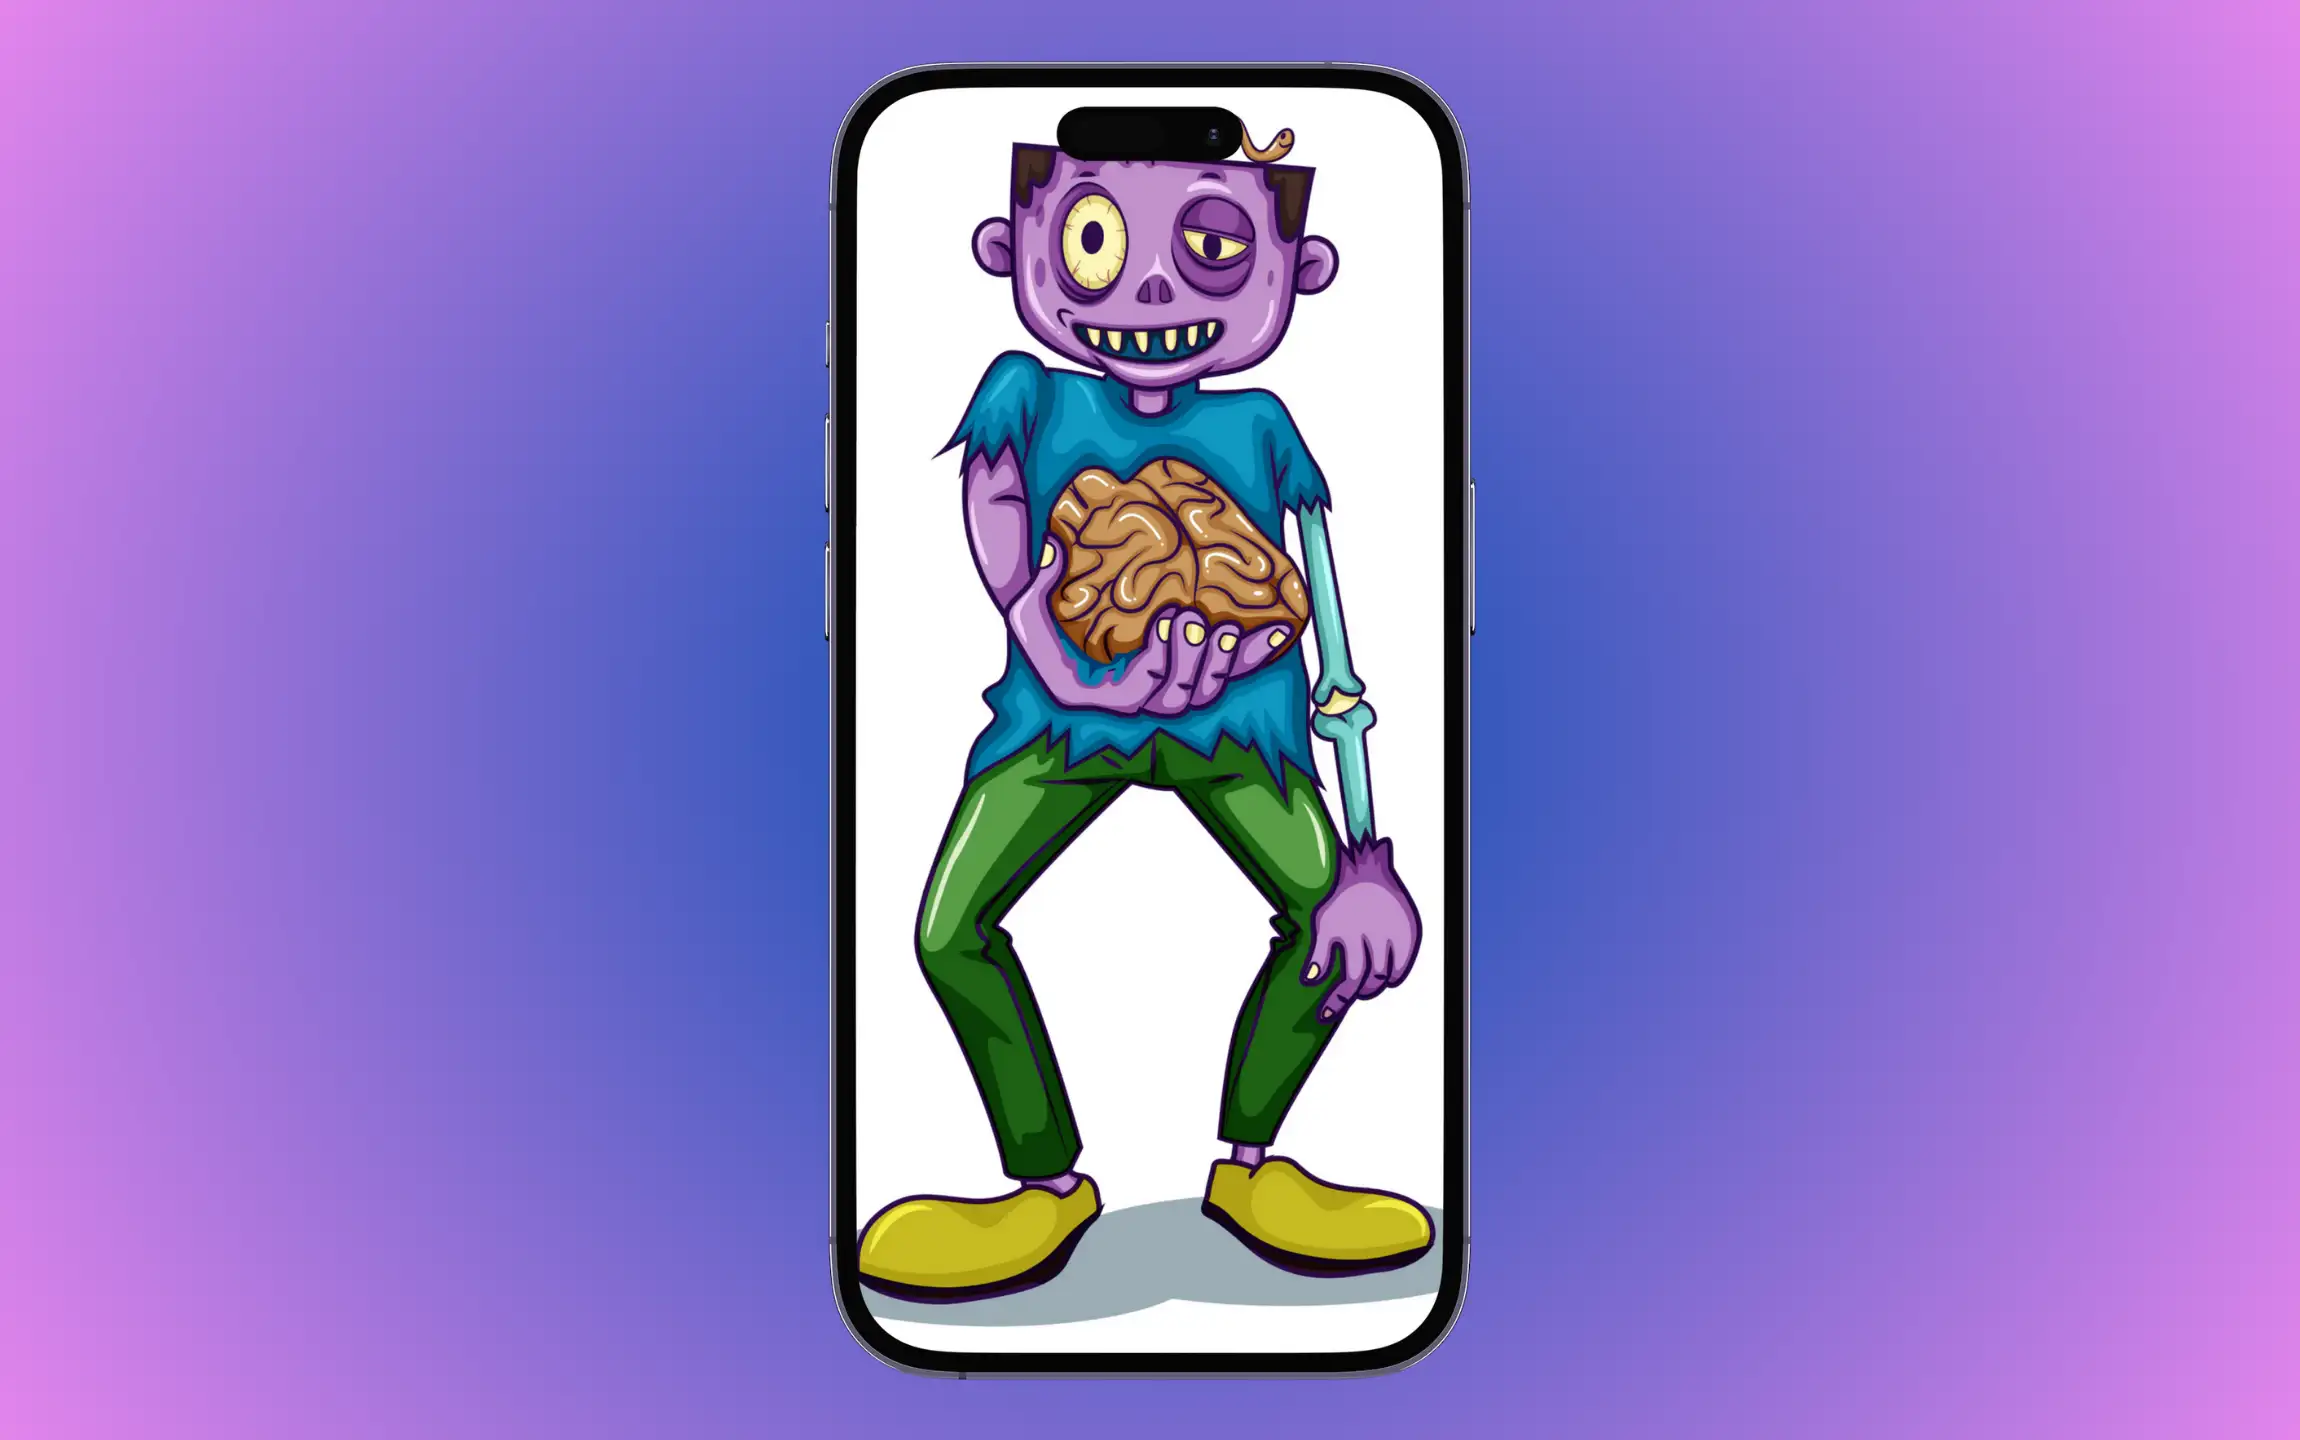 Funny Zombie wallpaper for iphone